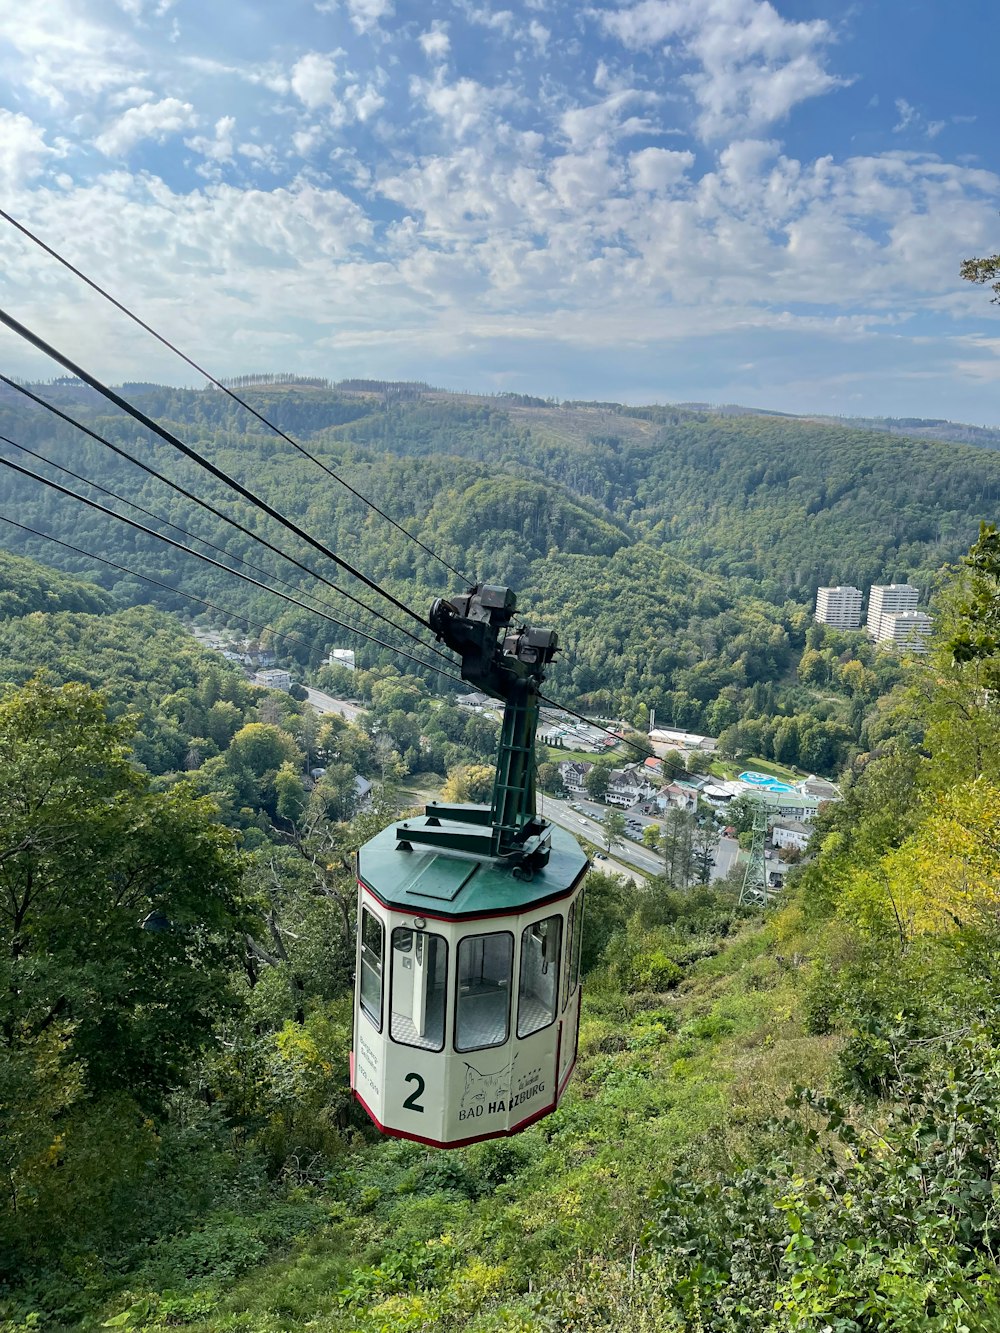 a cable car going up a hill in the mountains